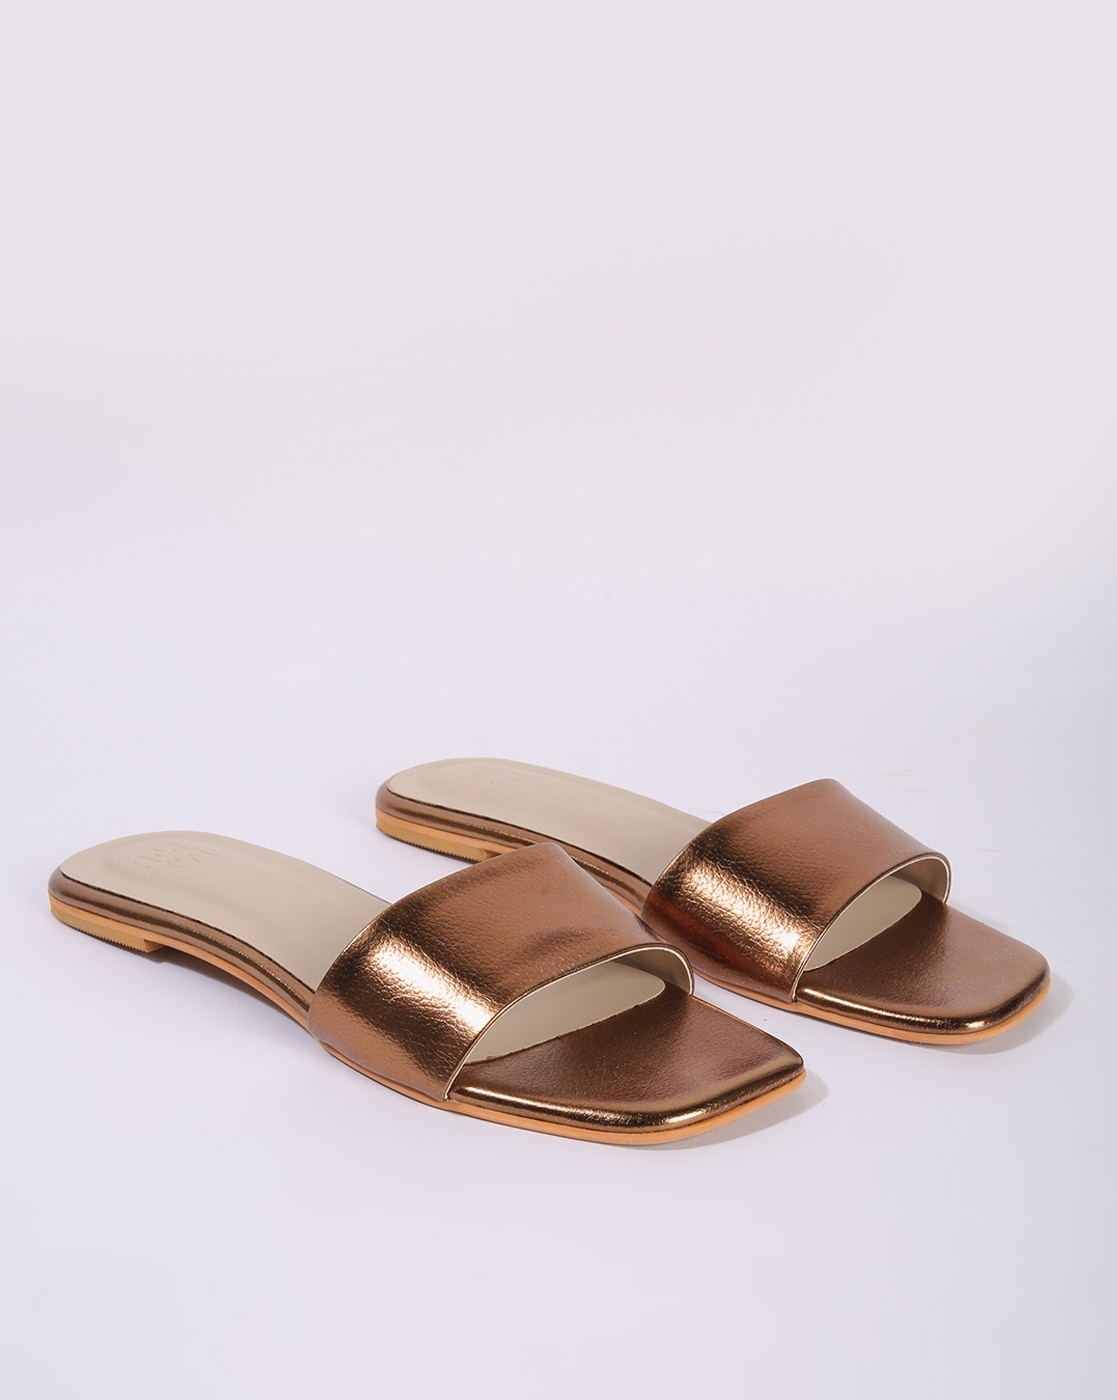 Update more than 78 gold leather sandals latest